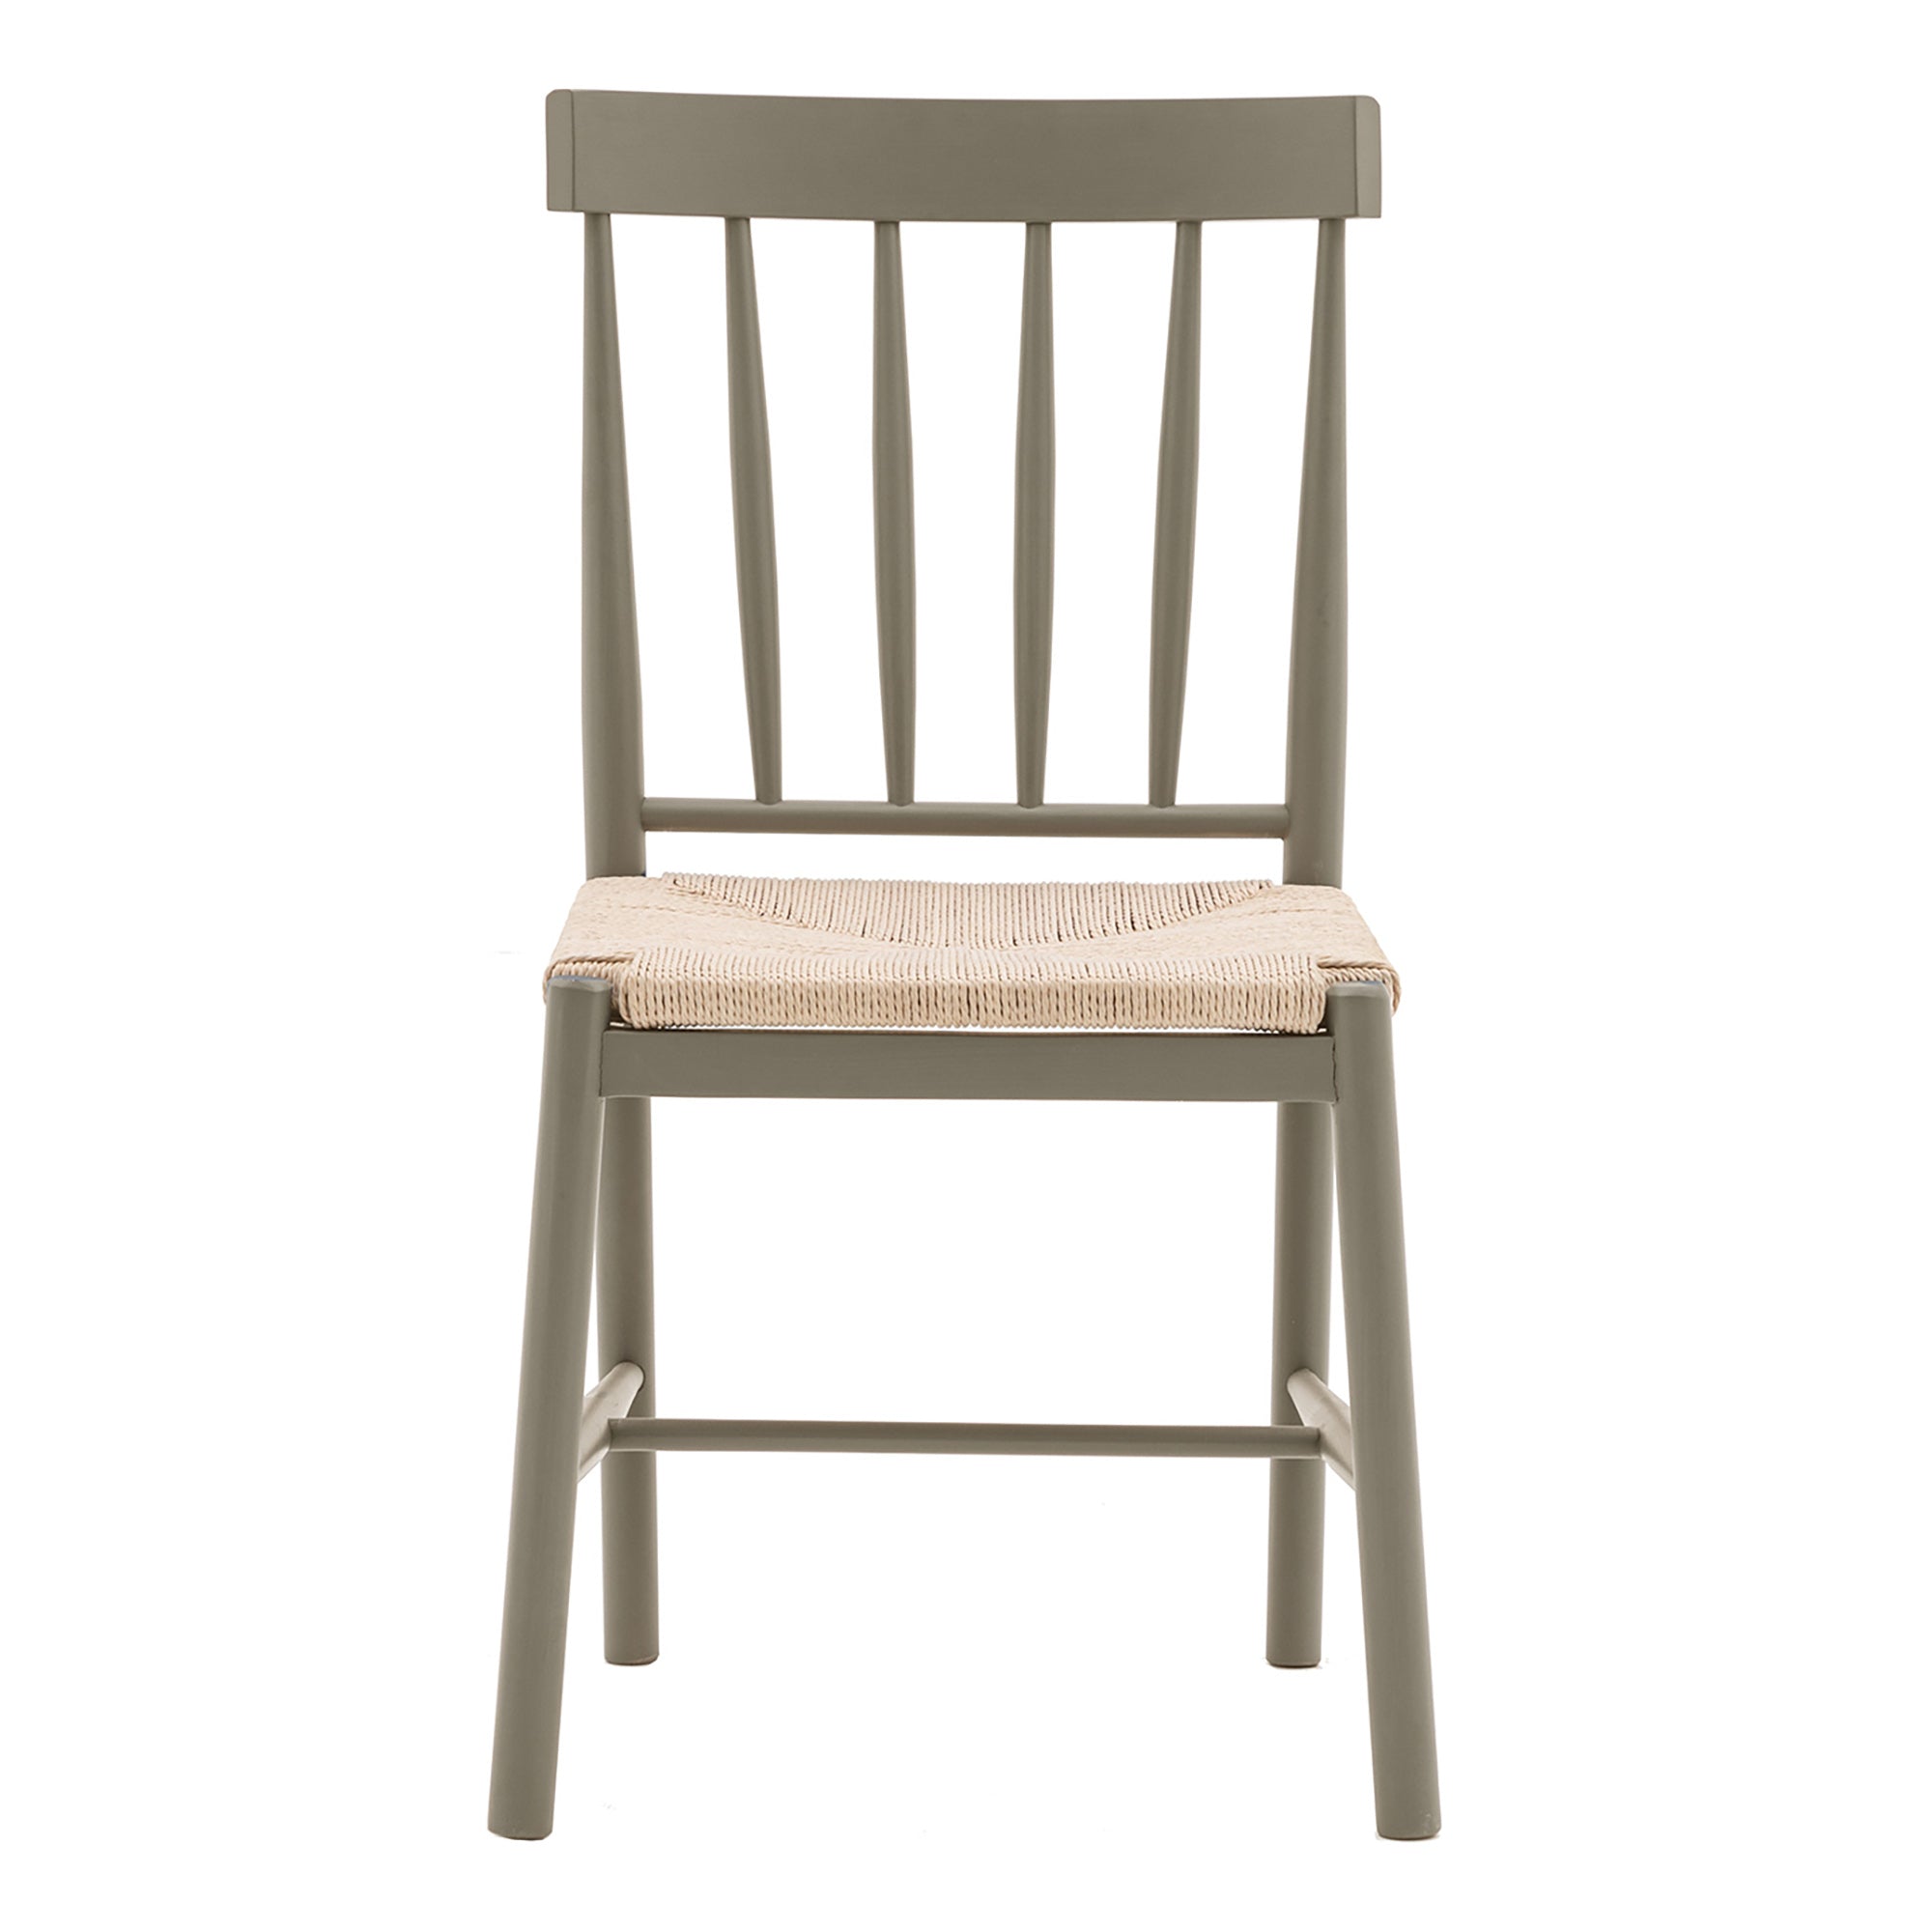 Classic Oak Farmhouse Dining Chair - Two Pack